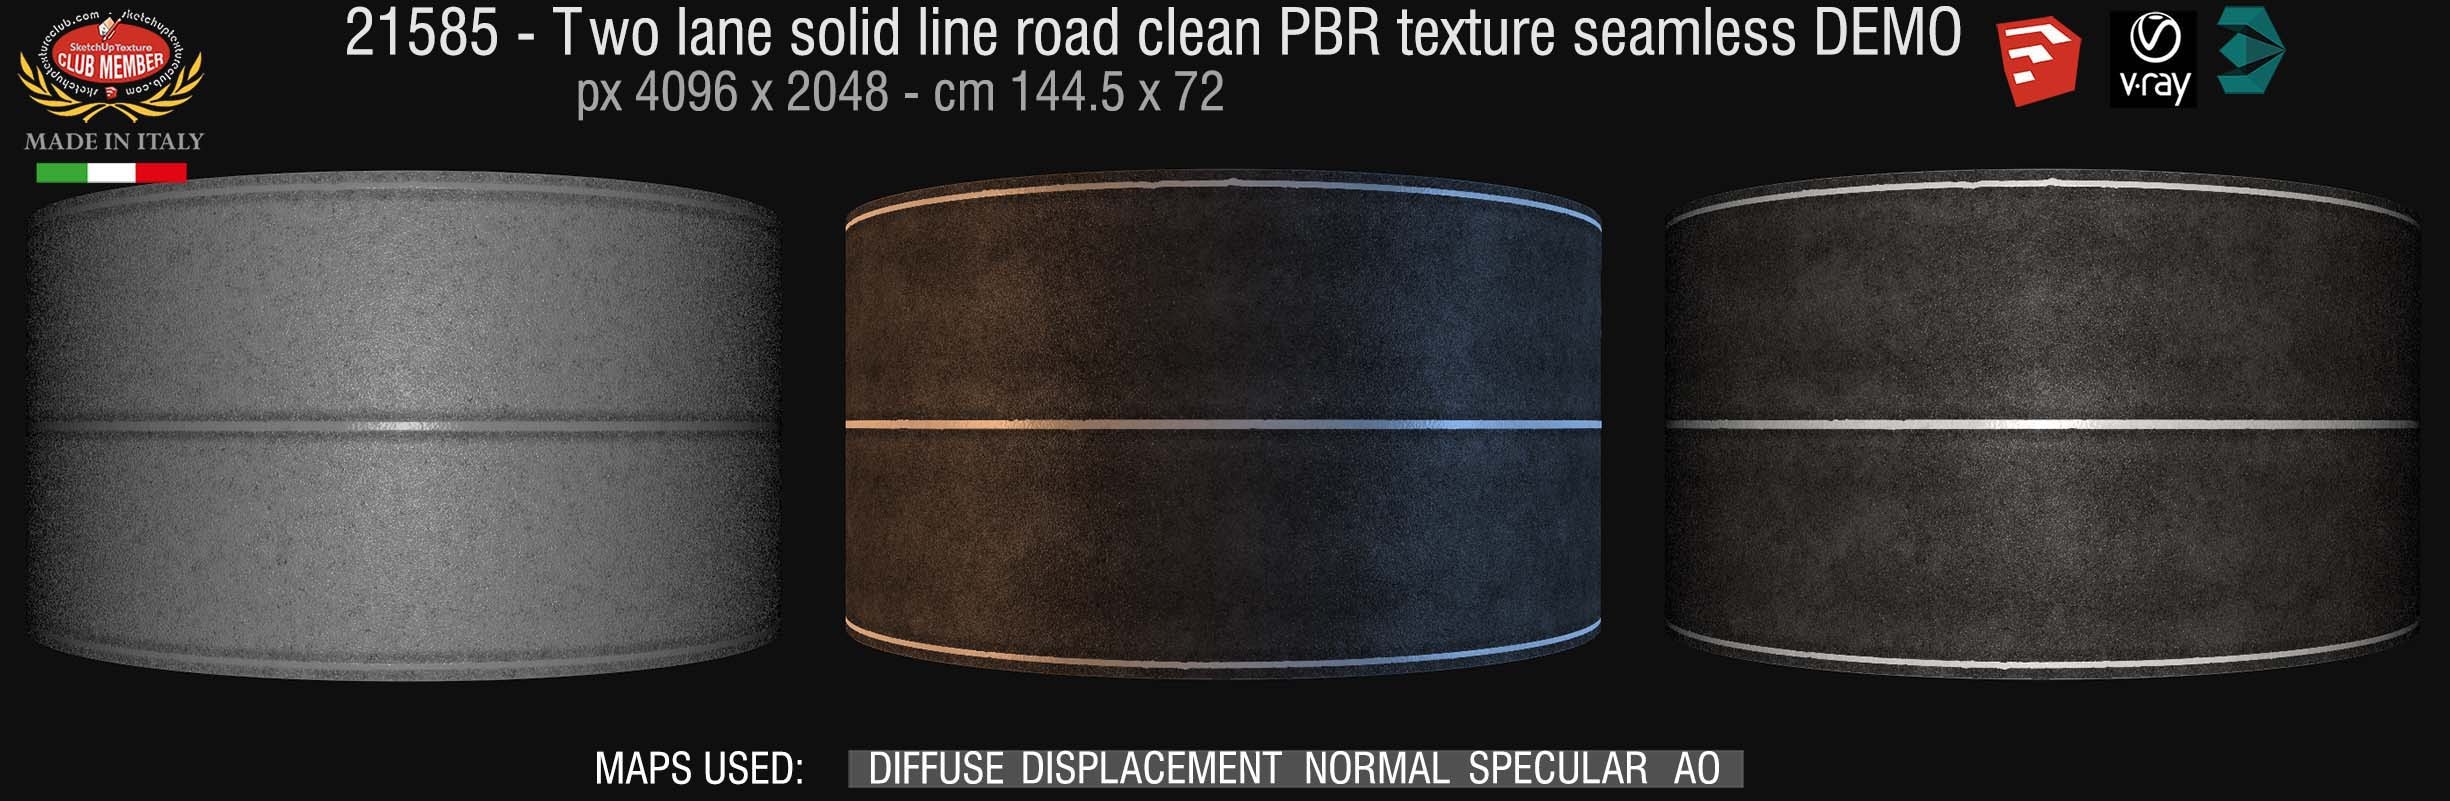 21585 Two lane solid line road clean PBR texture seamless DEMO